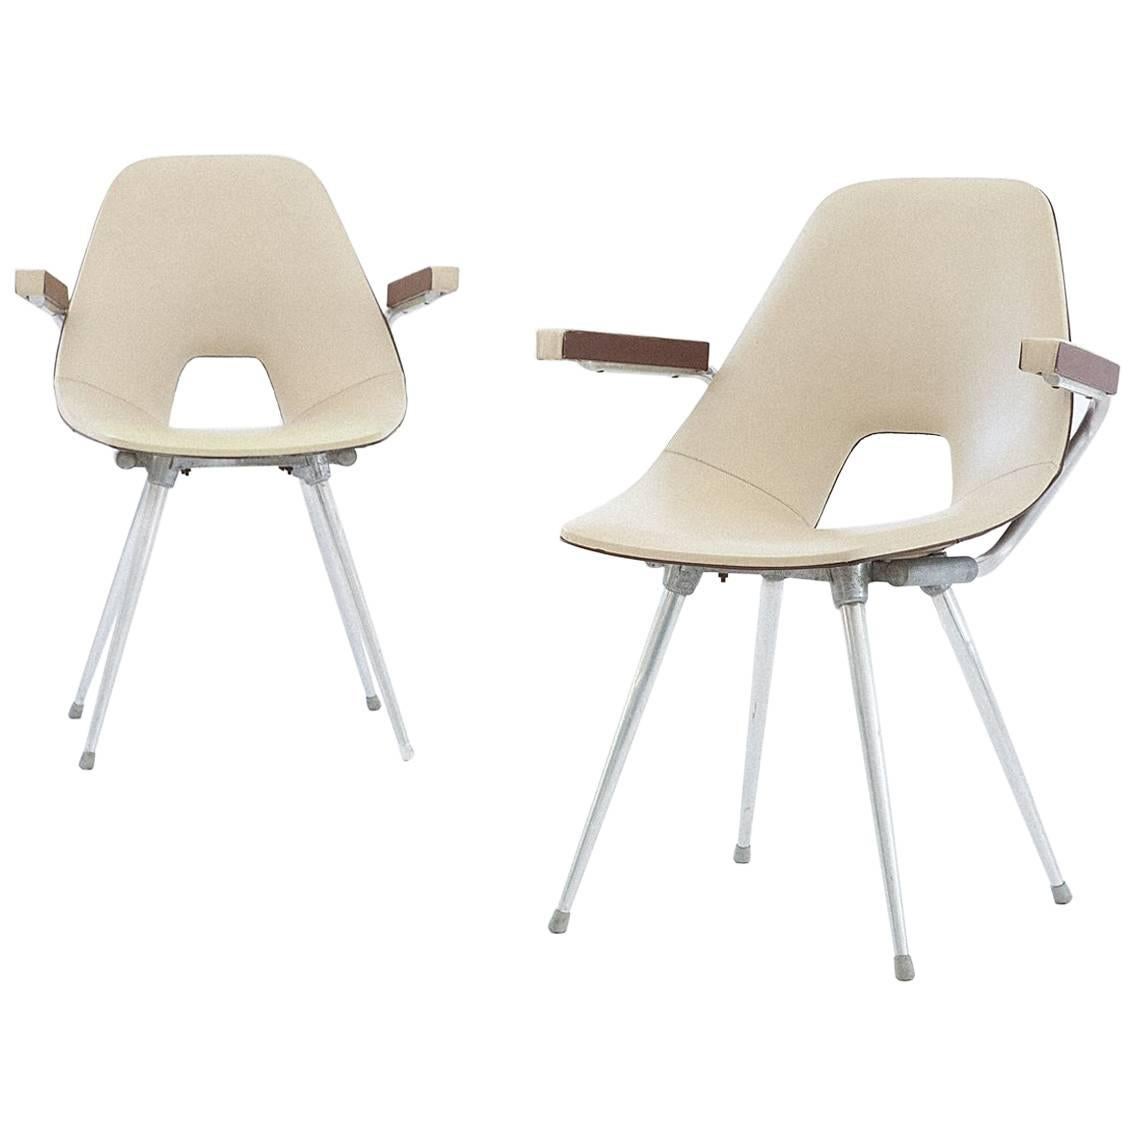 Mid-Century Italian Skai Chairs by S.I.A. Bologna, 1950s, Set of Two